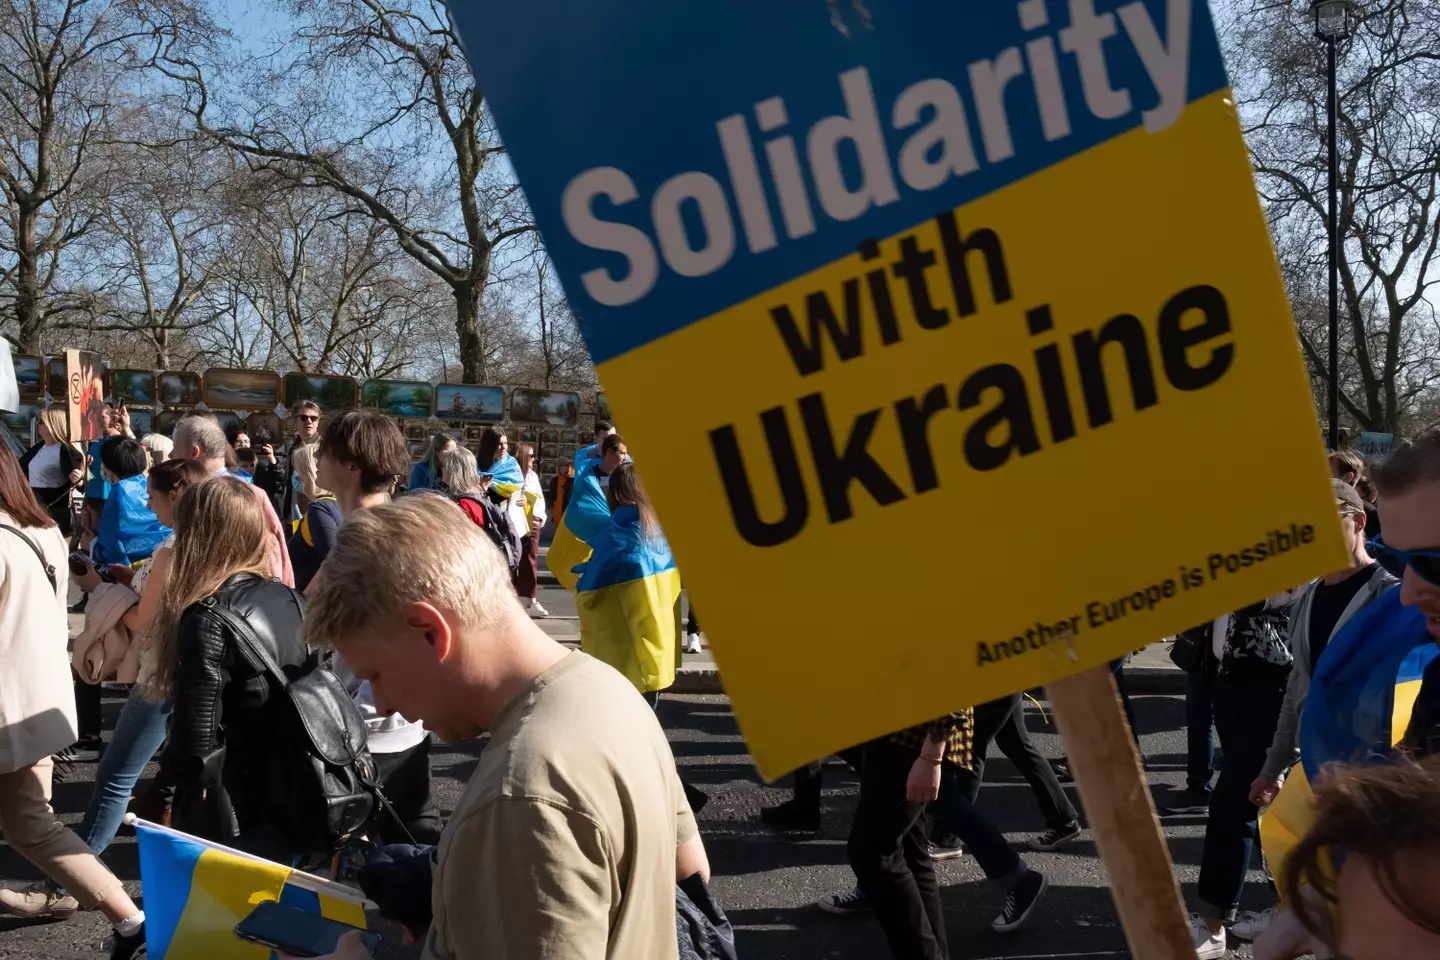 Ukrainians and supporters march in protest against the Russian invasion (